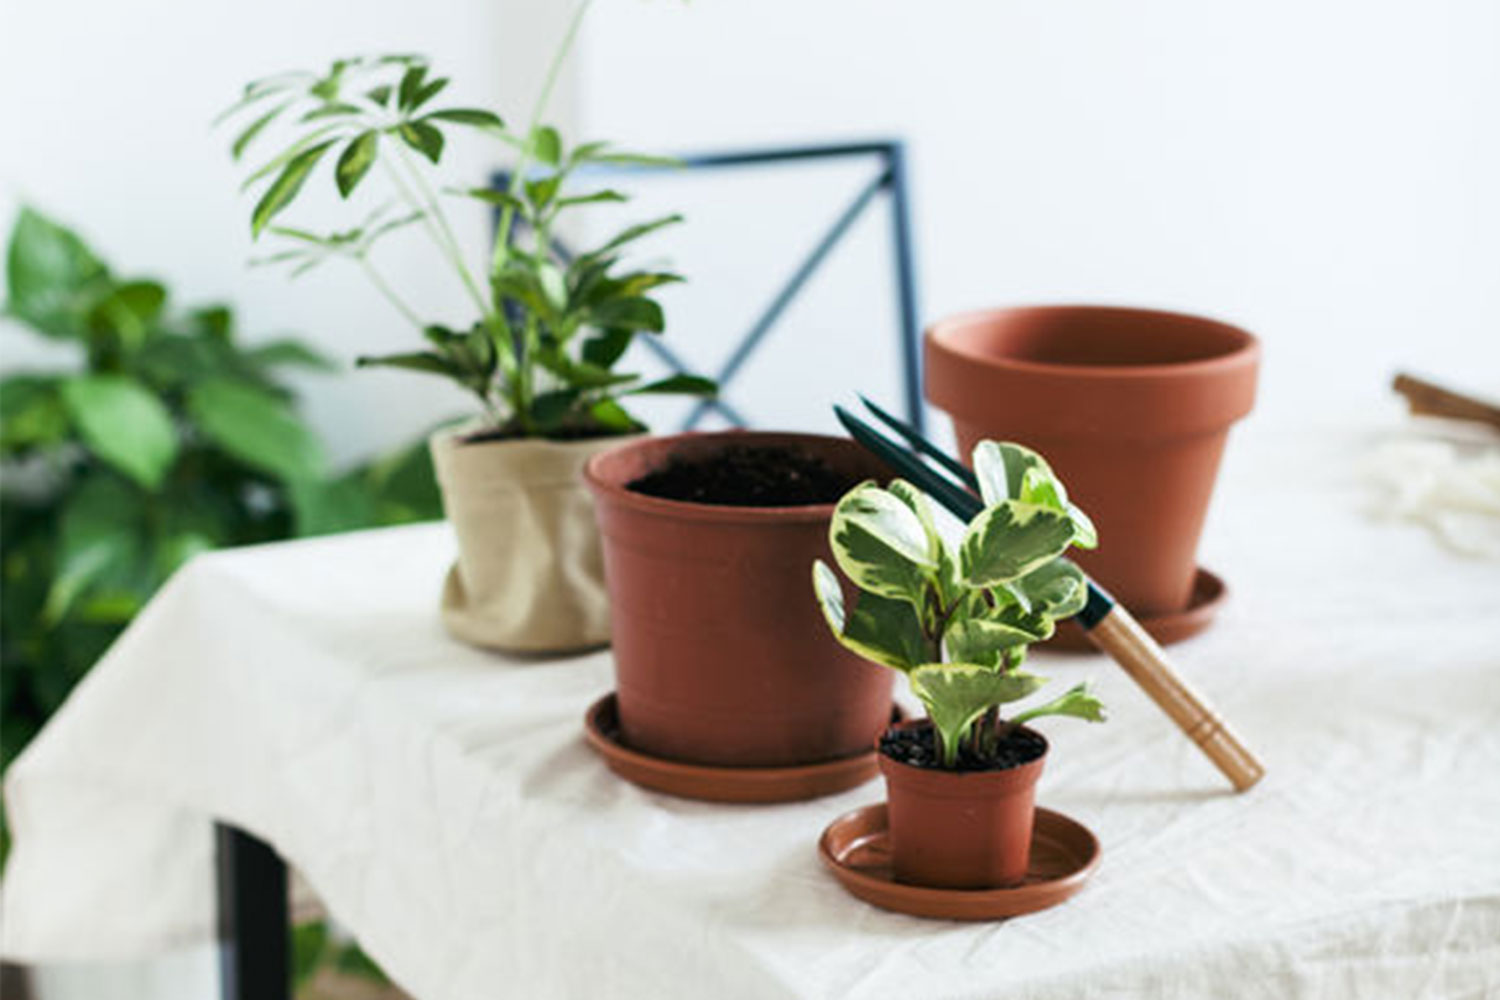 Set up a table of indoor plants decor ideas